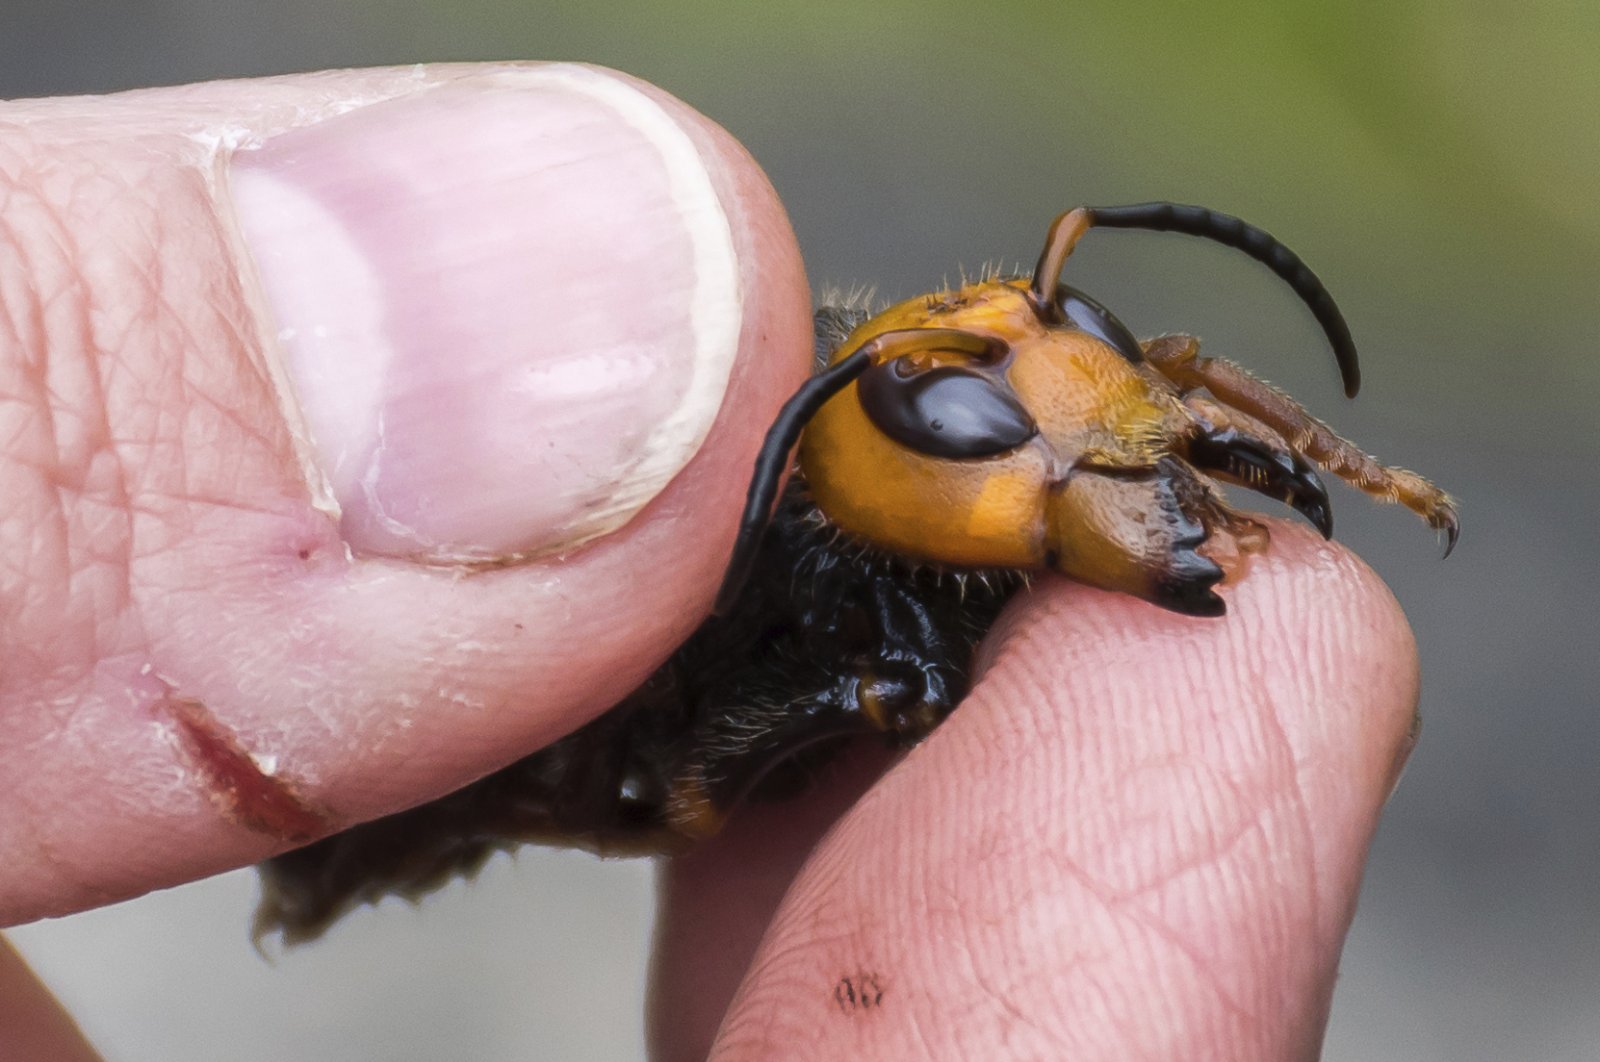 In this April 23, 2020, photo provided by the Washington State Department of Agriculture, a researcher holds a dead Asian giant hornet in Blaine, Wash. (AP Photo)